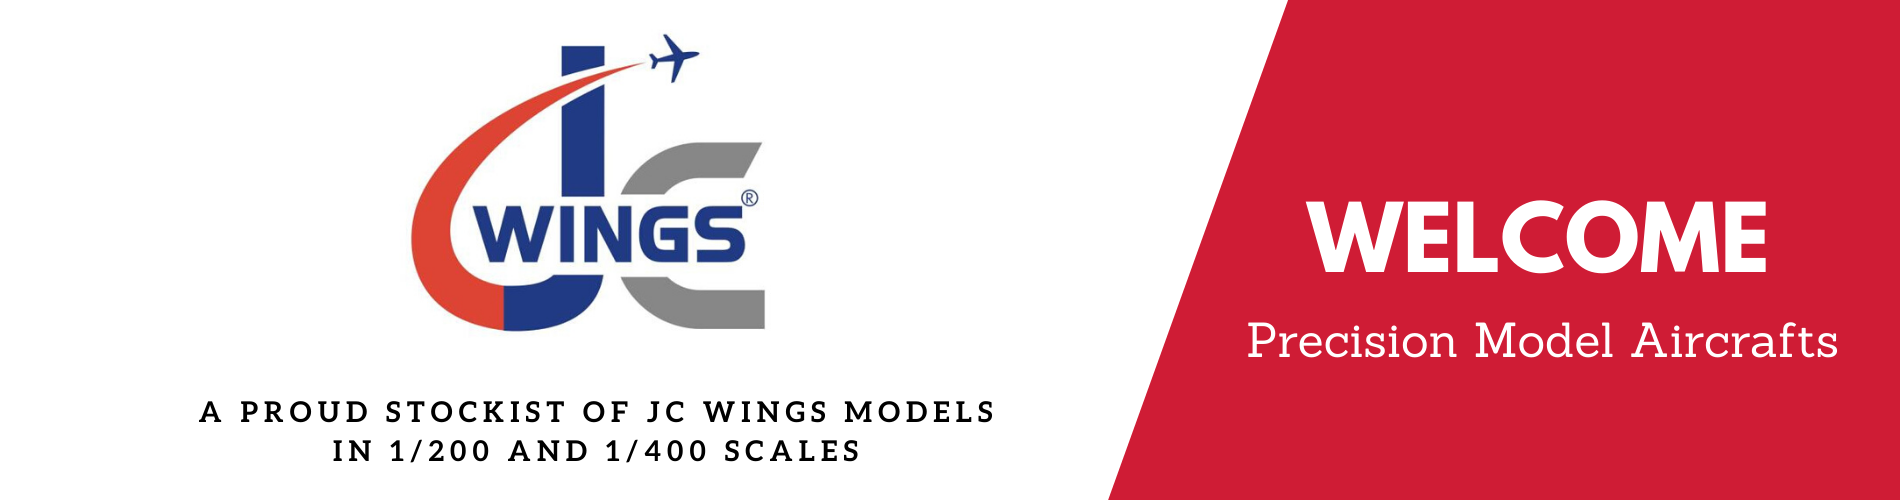 Wings Aircraft Model Stockist of JC Wings Models